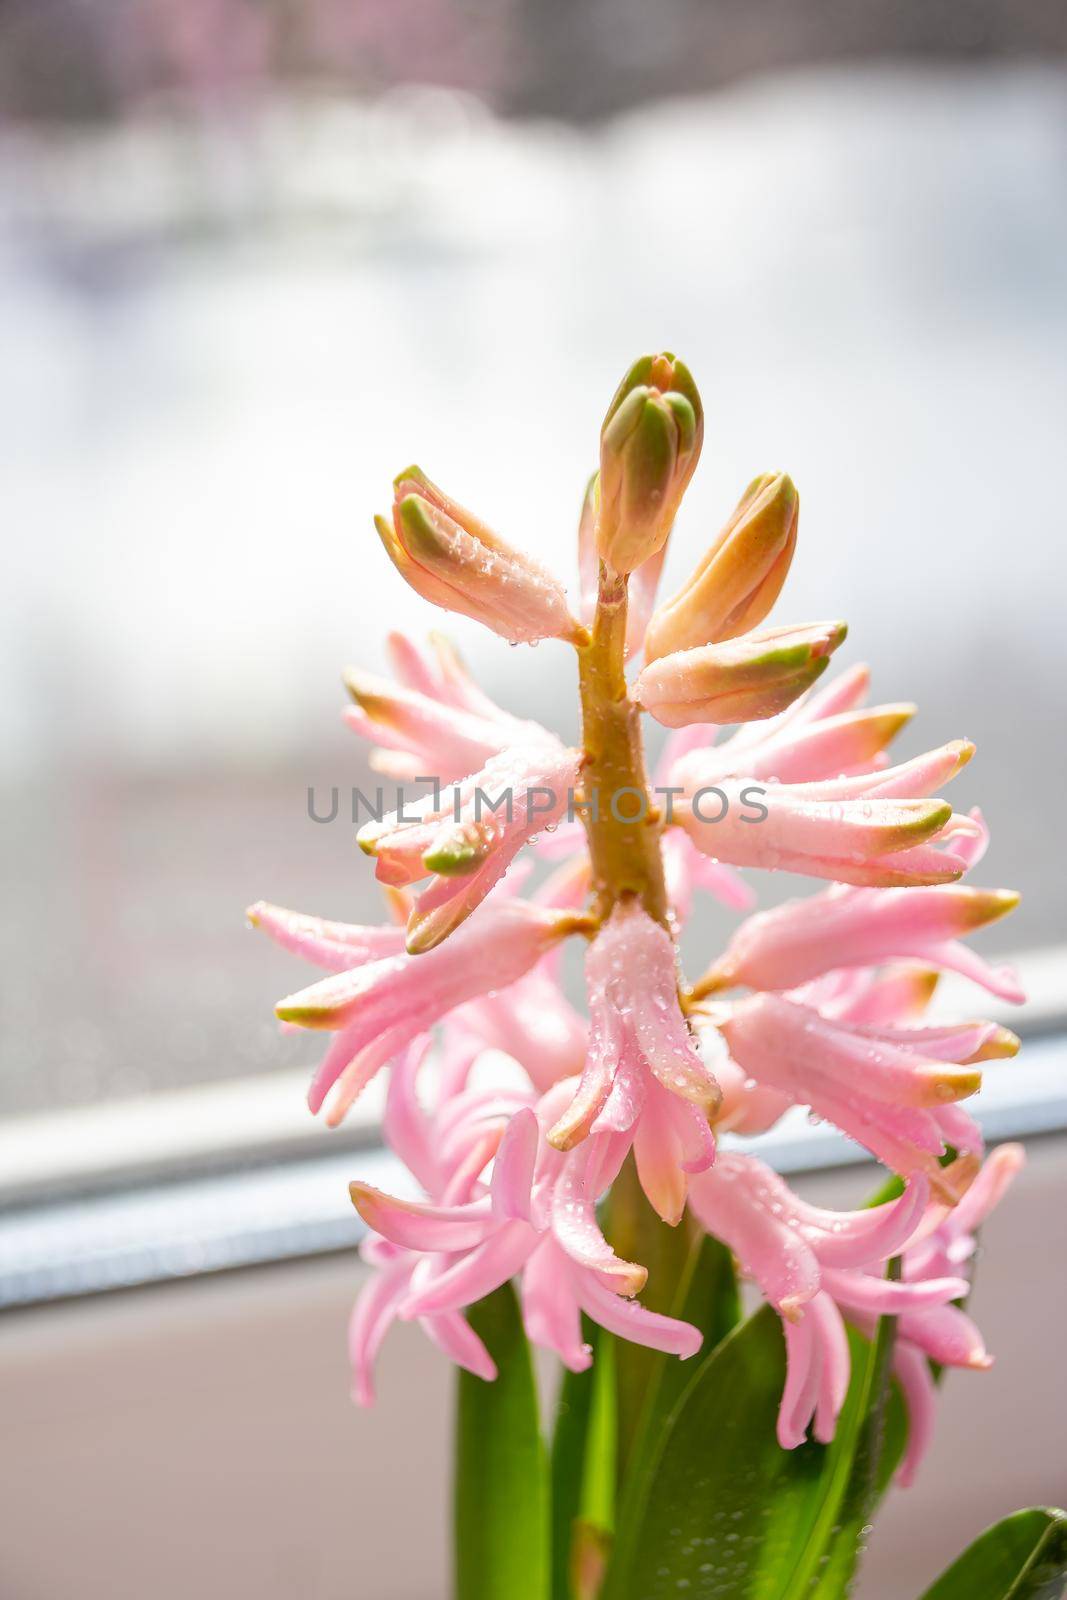 Hyacinth Pink Surprise Dutch Hyacinth . Spring flowers. The perfume of blooming hyacinths is a symbol of early spring.